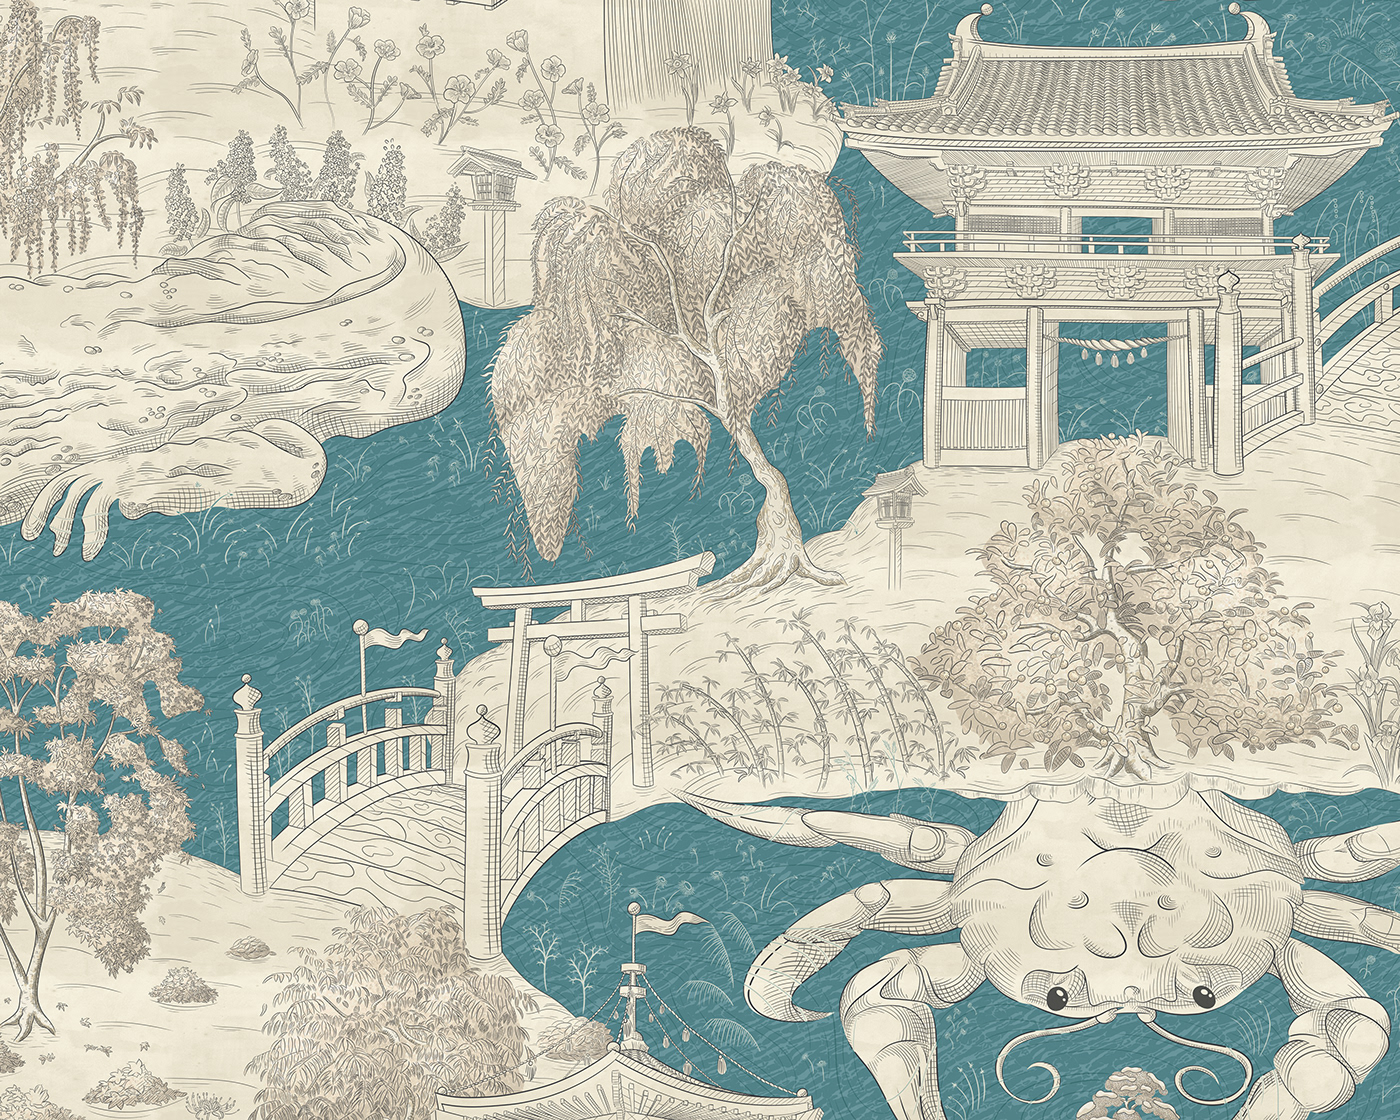 An illustration that shows two islands connected by a Japanese moon bridge and a giant crab.